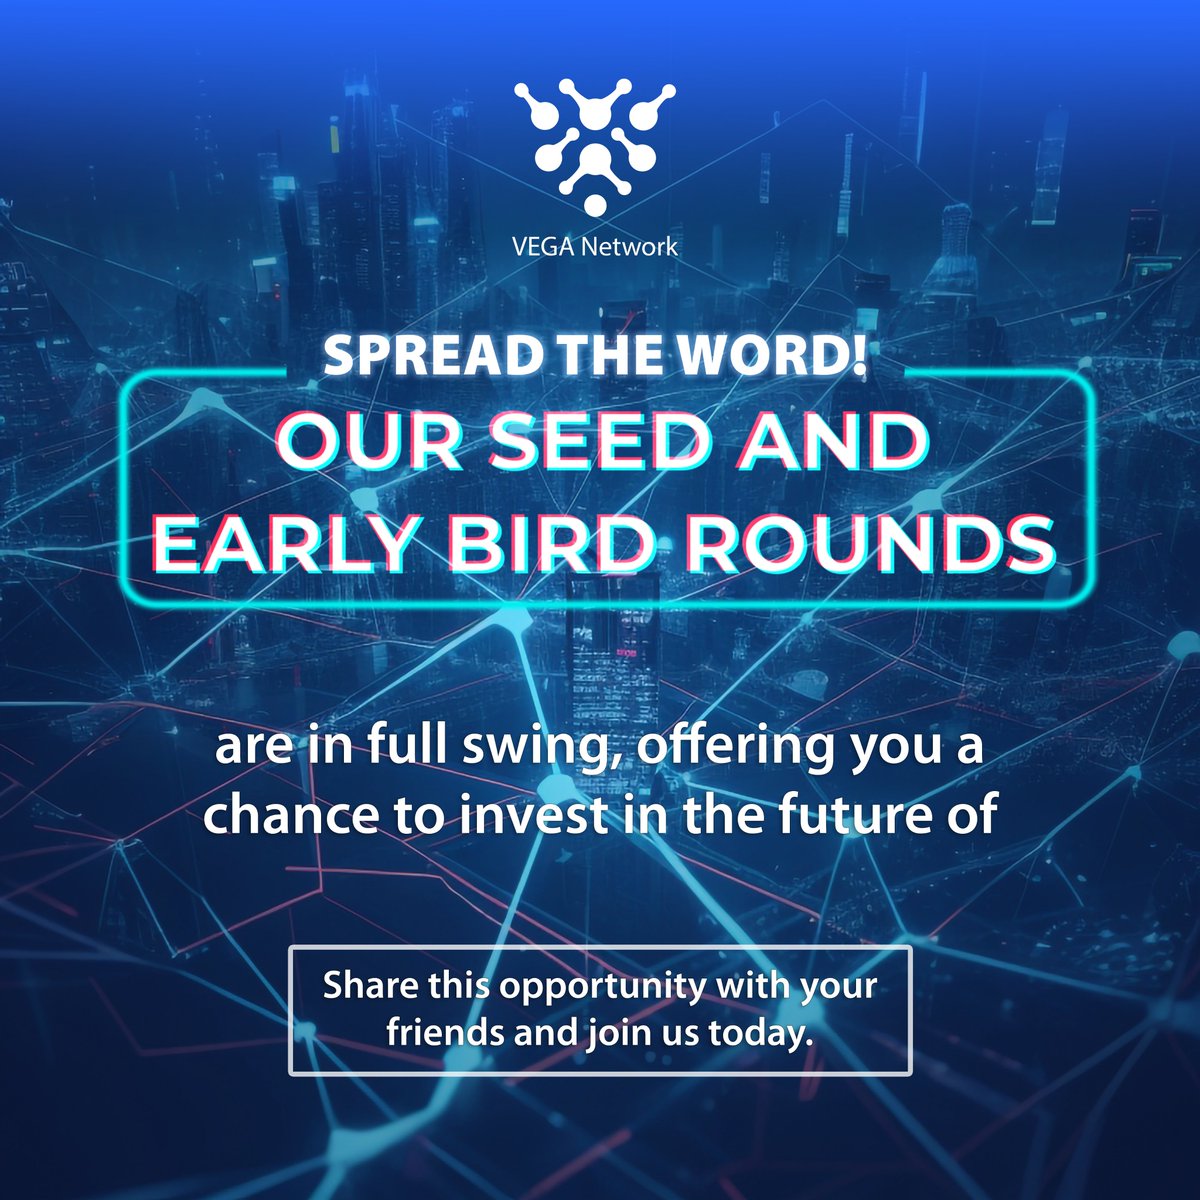 🎉 Spread the word! Our SEED and Early Bird Rounds are in full swing, offering you a chance to invest in the future of commerce. Share this opportunity with your friends and join us today. #VEGANetwork #SEEDRound #EarlyBird #Decentralized #Blockchain